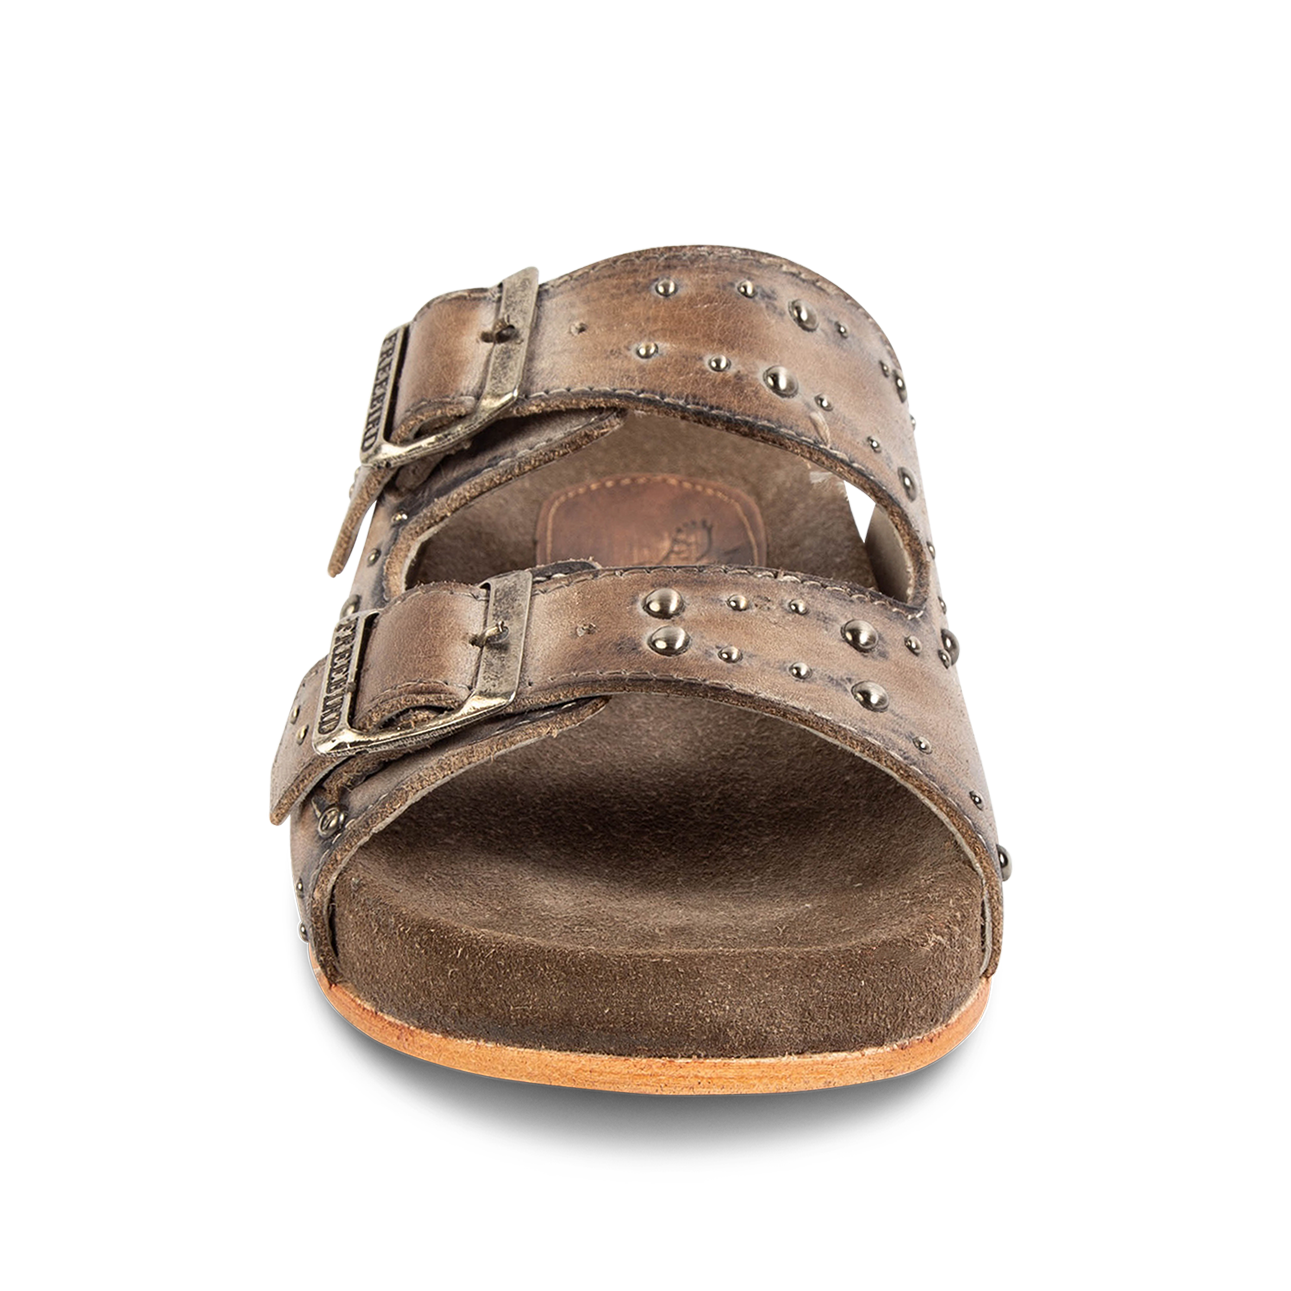 Front view showing FREEBIRD women's Asher stone sandal with adjustable belt buckles, a suede footbed and silver embellishments